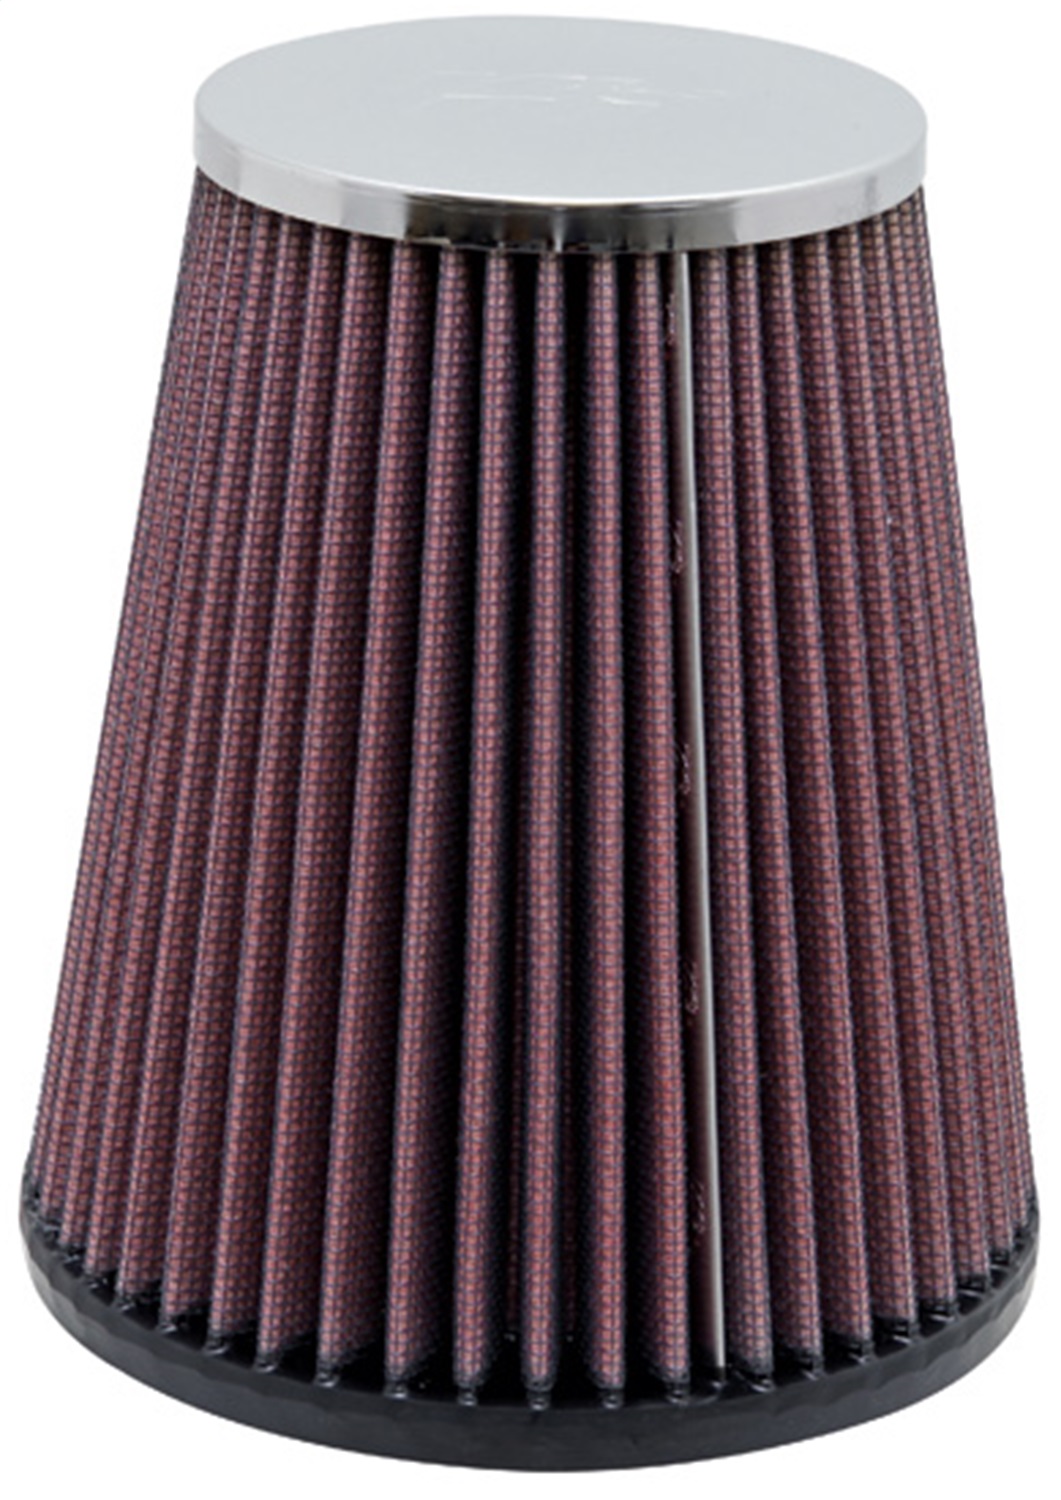 K&N Filters K&N Filters RC-4160 Universal Air Cleaner Assembly